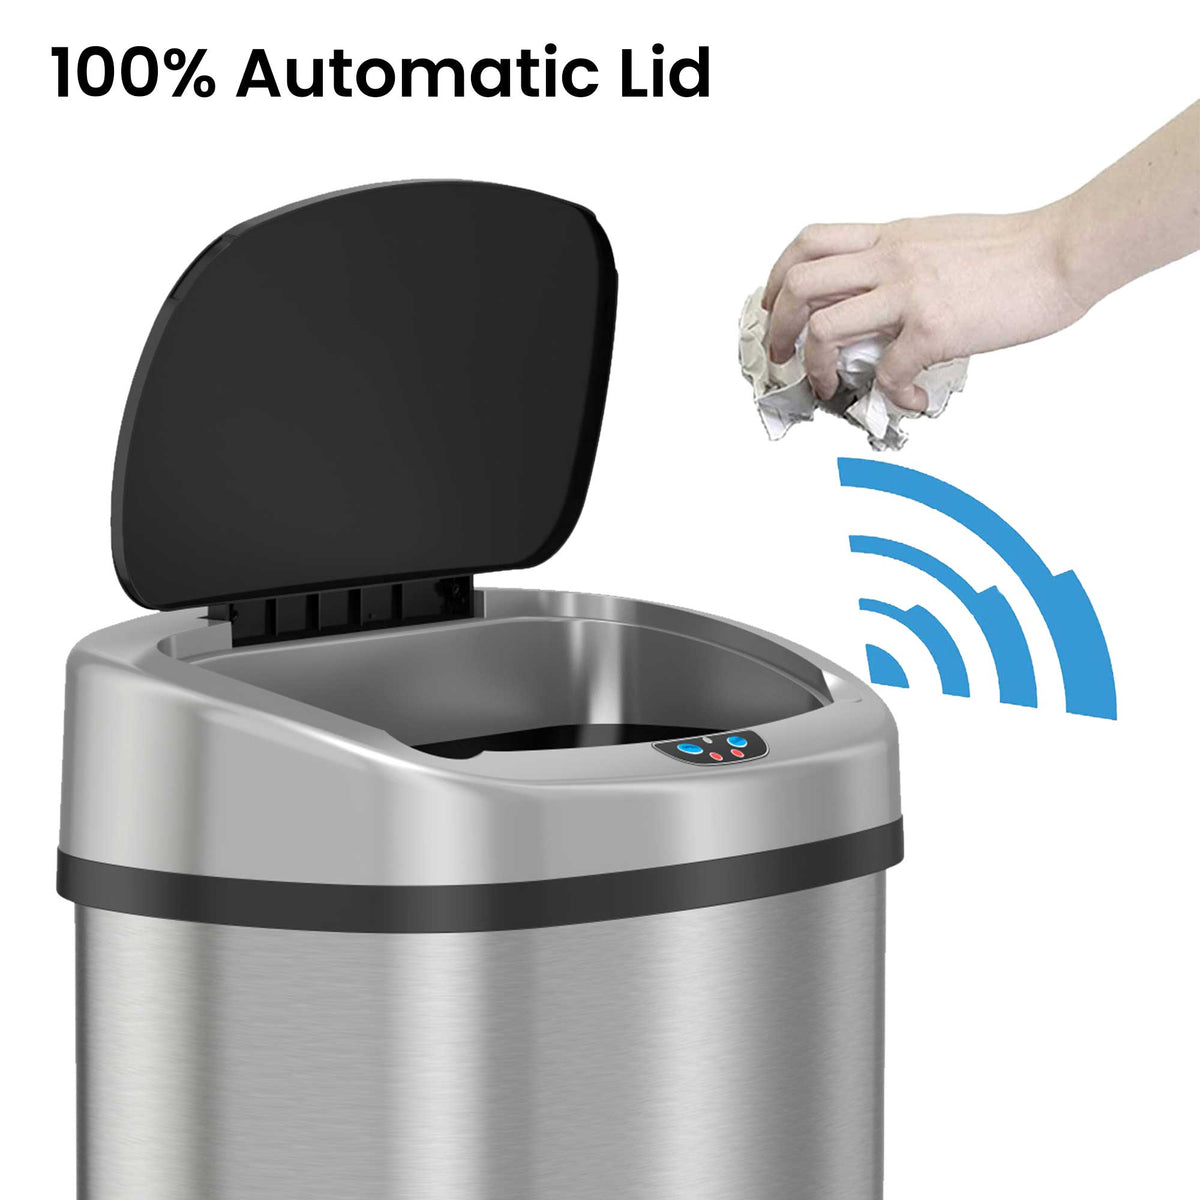 13 Gallon Oval Stainless Steel Sensor Trash Can with Odor Filter